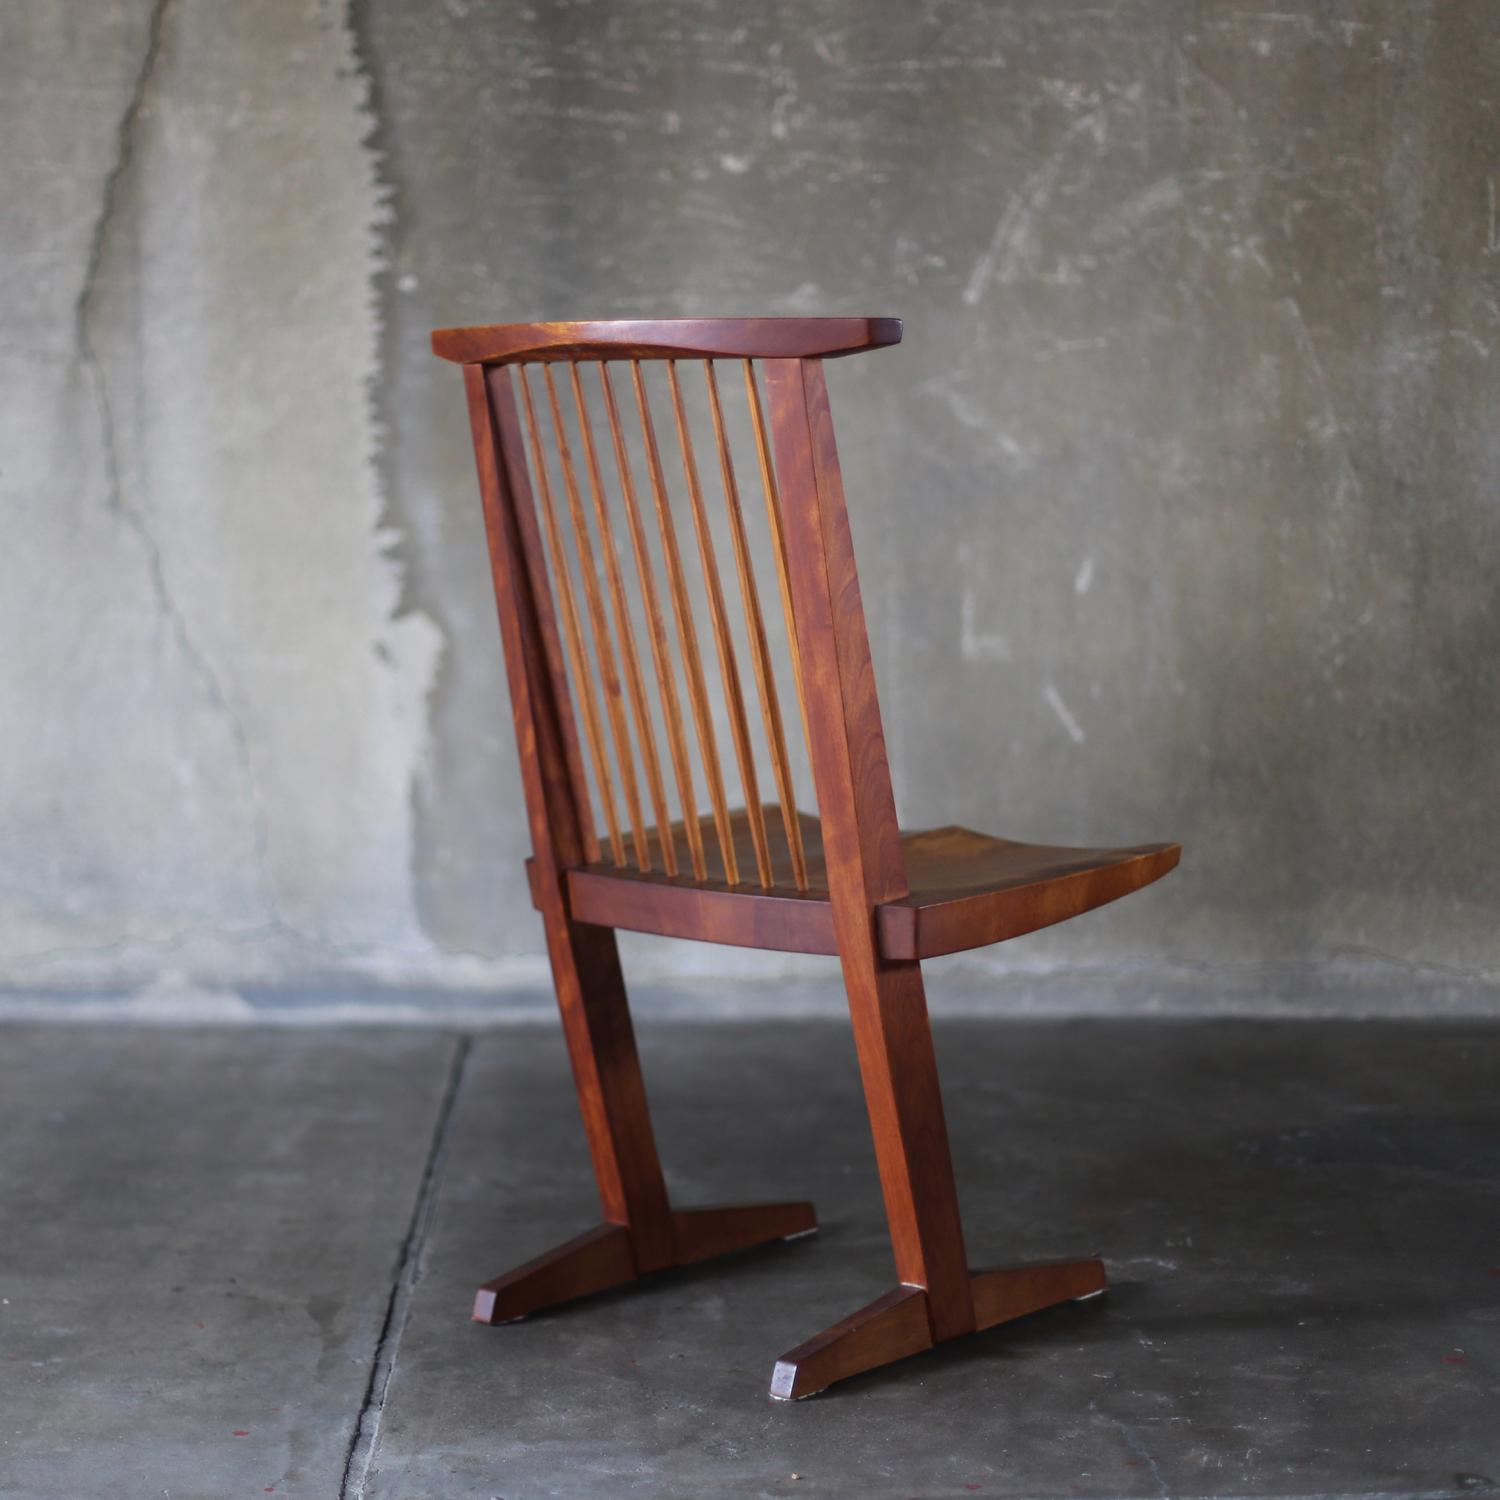 George Nakashima's products are now produced in only 2 locations around the world. They are 